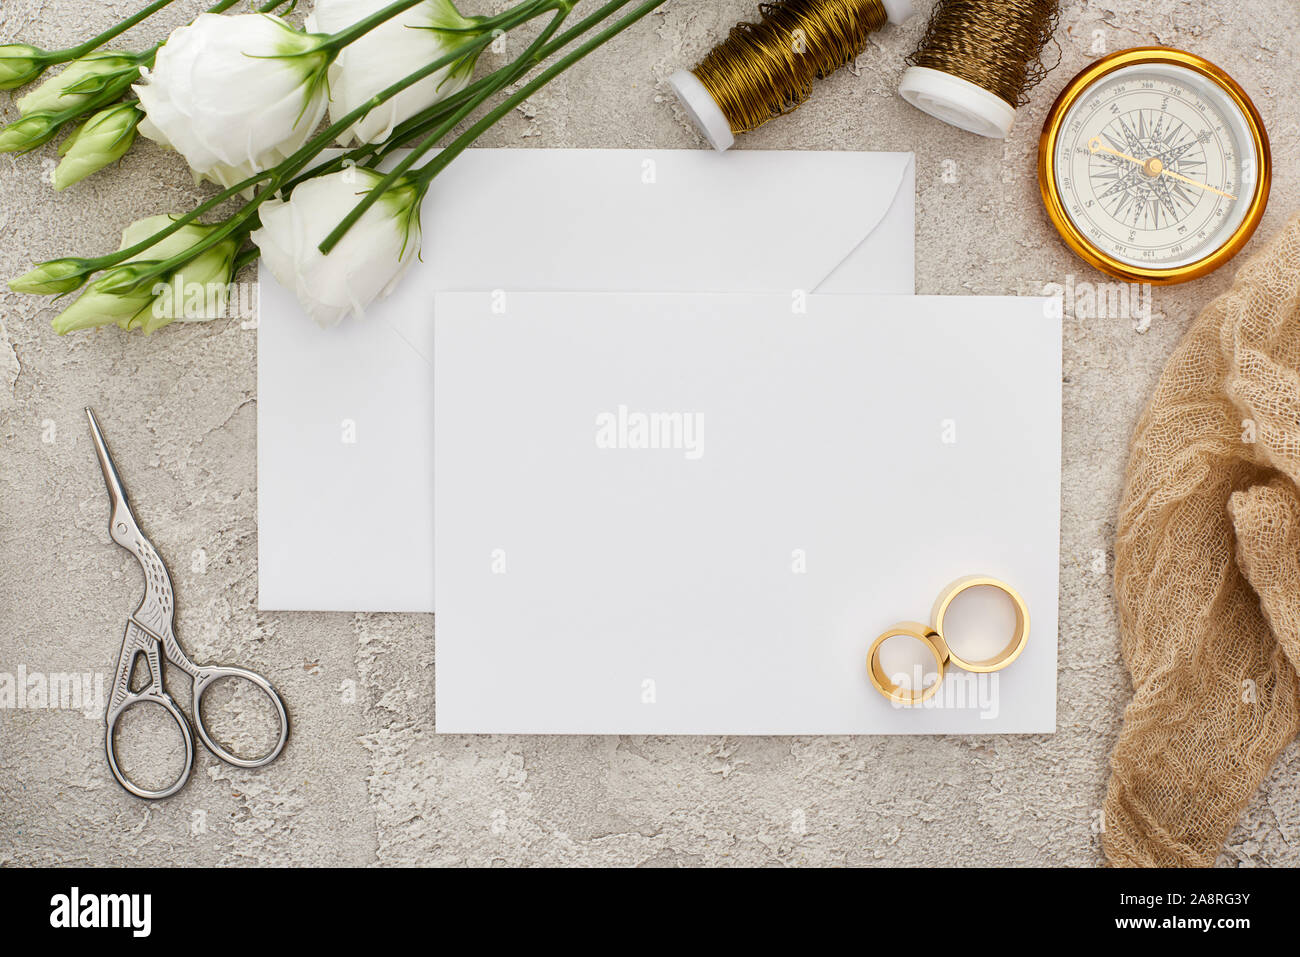 top view of wedding rings on empty card near white eustoma flowers, spools, scissors and golden compass on grey surface Stock Photo